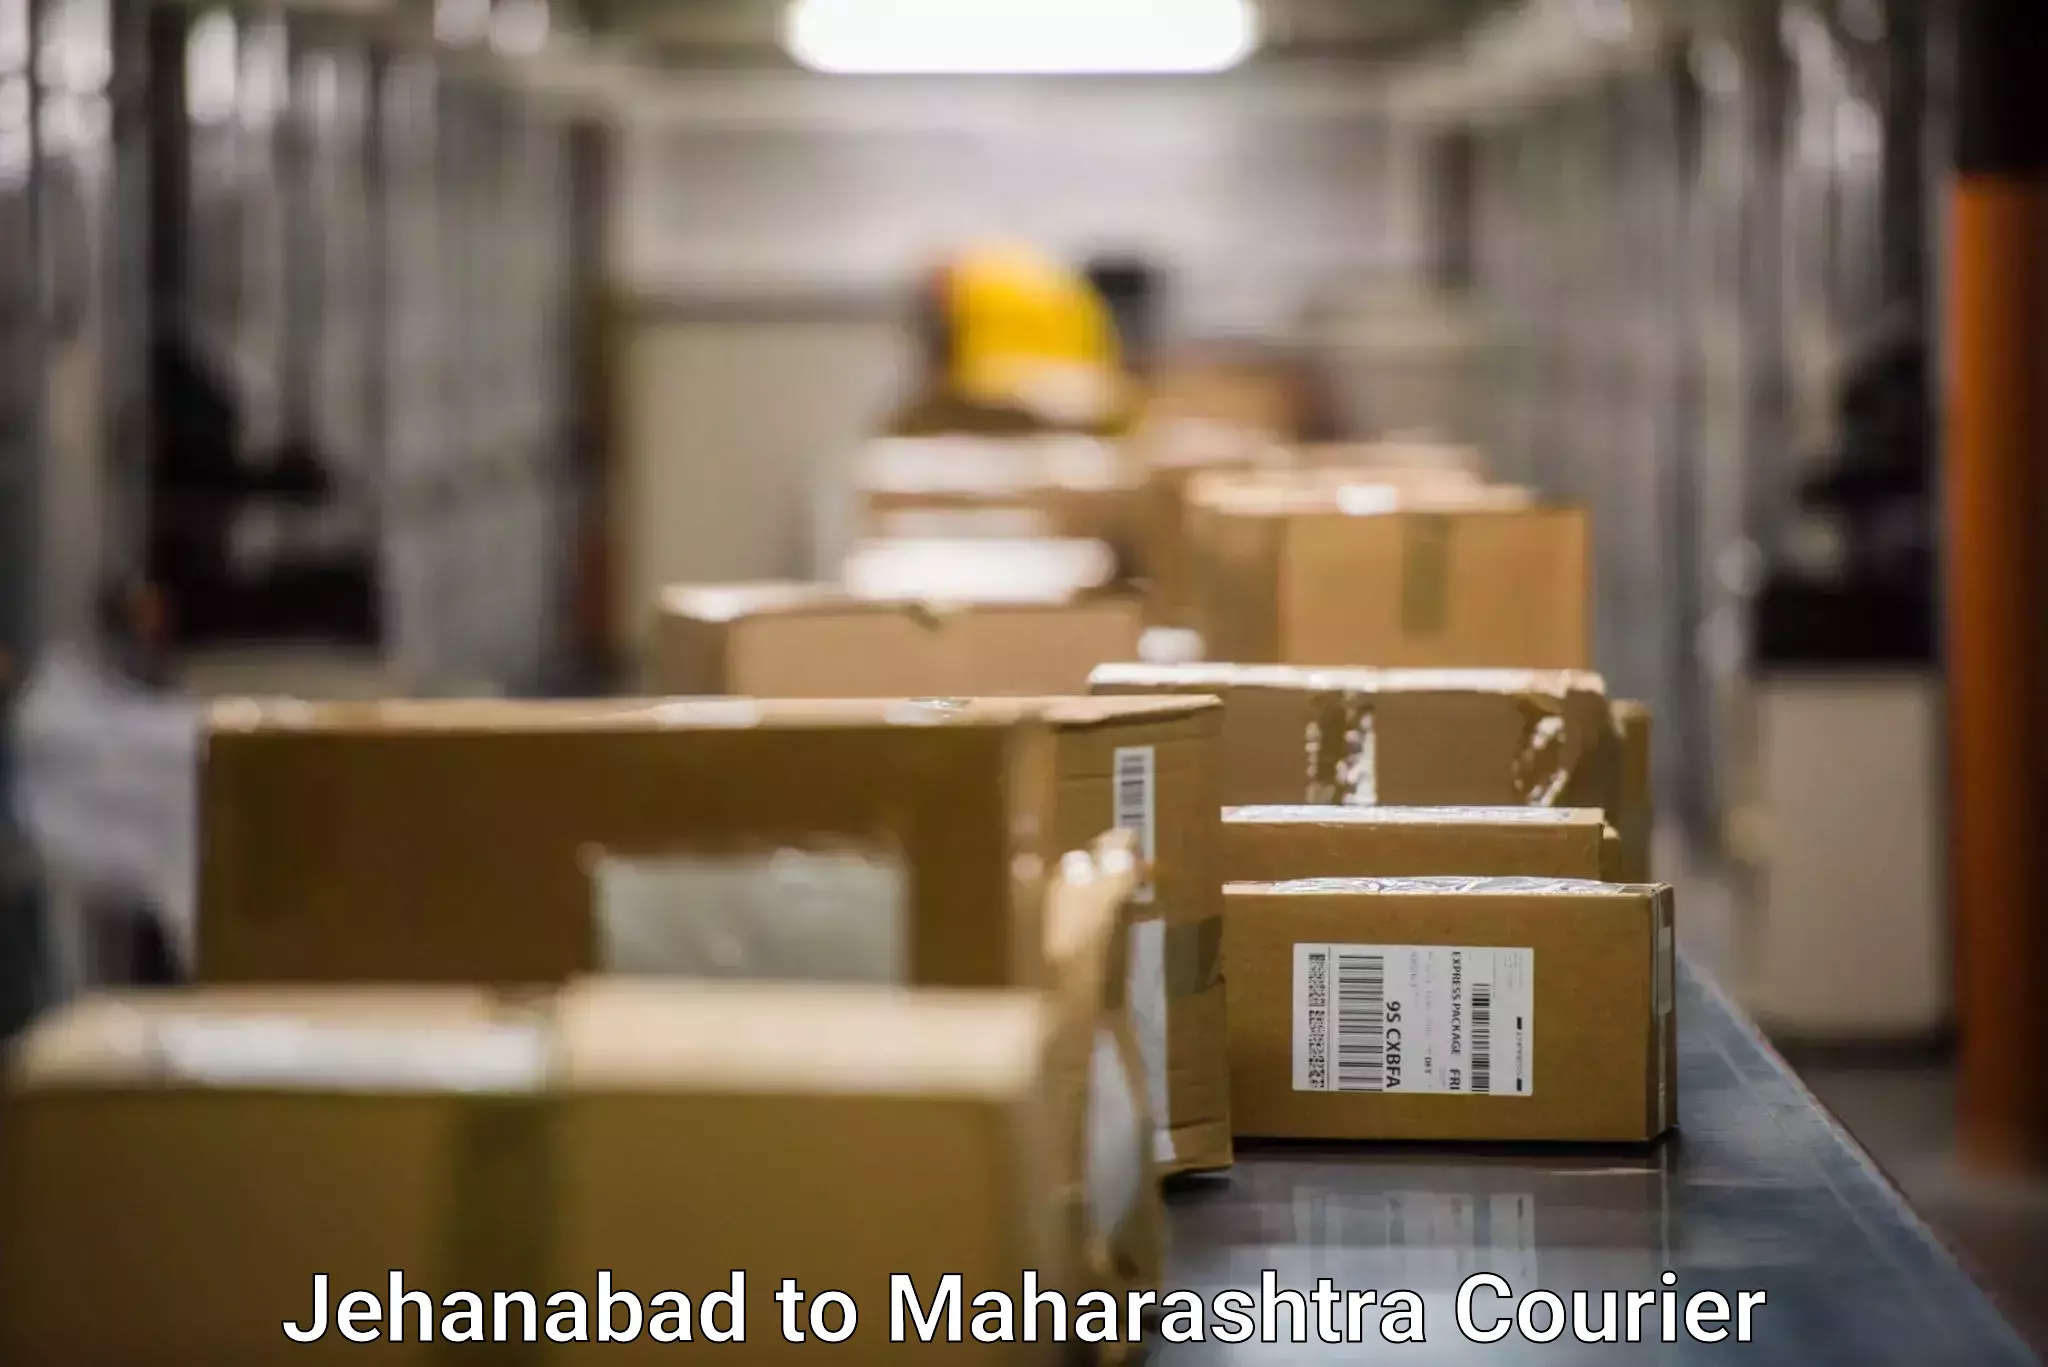 Courier service booking Jehanabad to Amravati